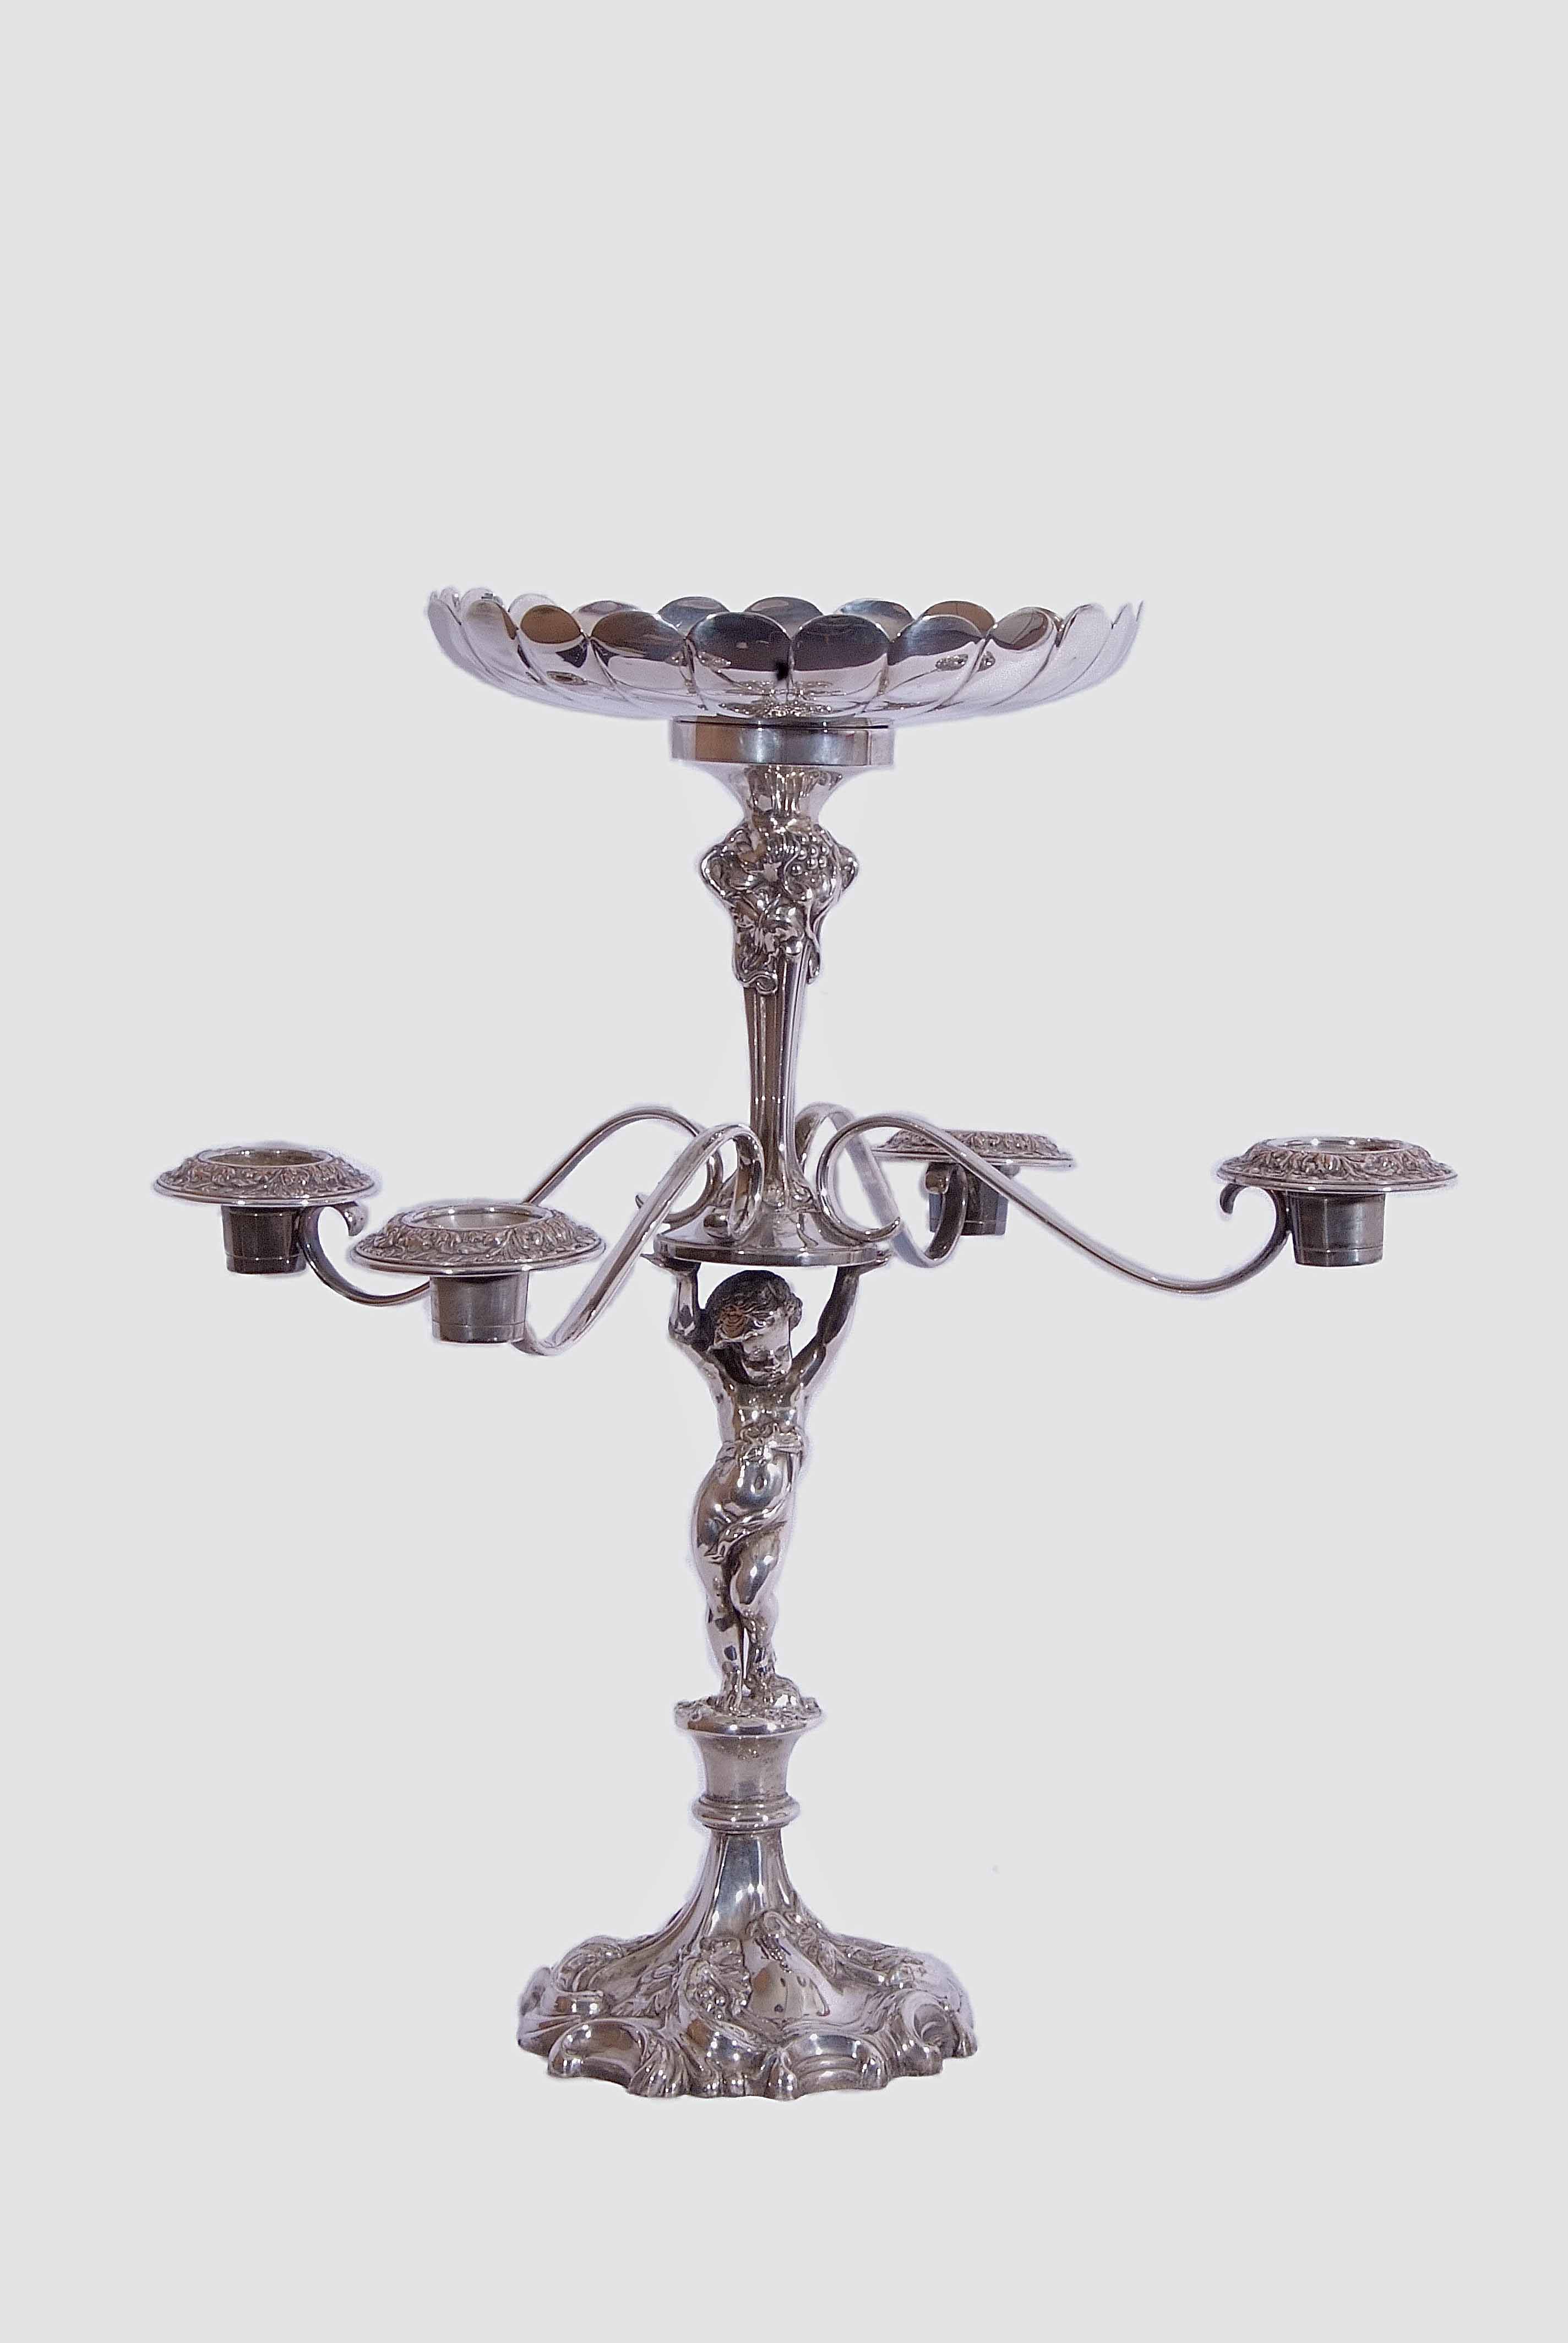 Elkington & Co silver plated centrepiece epergne/candelabrum, the top with fluted circular - Image 2 of 2